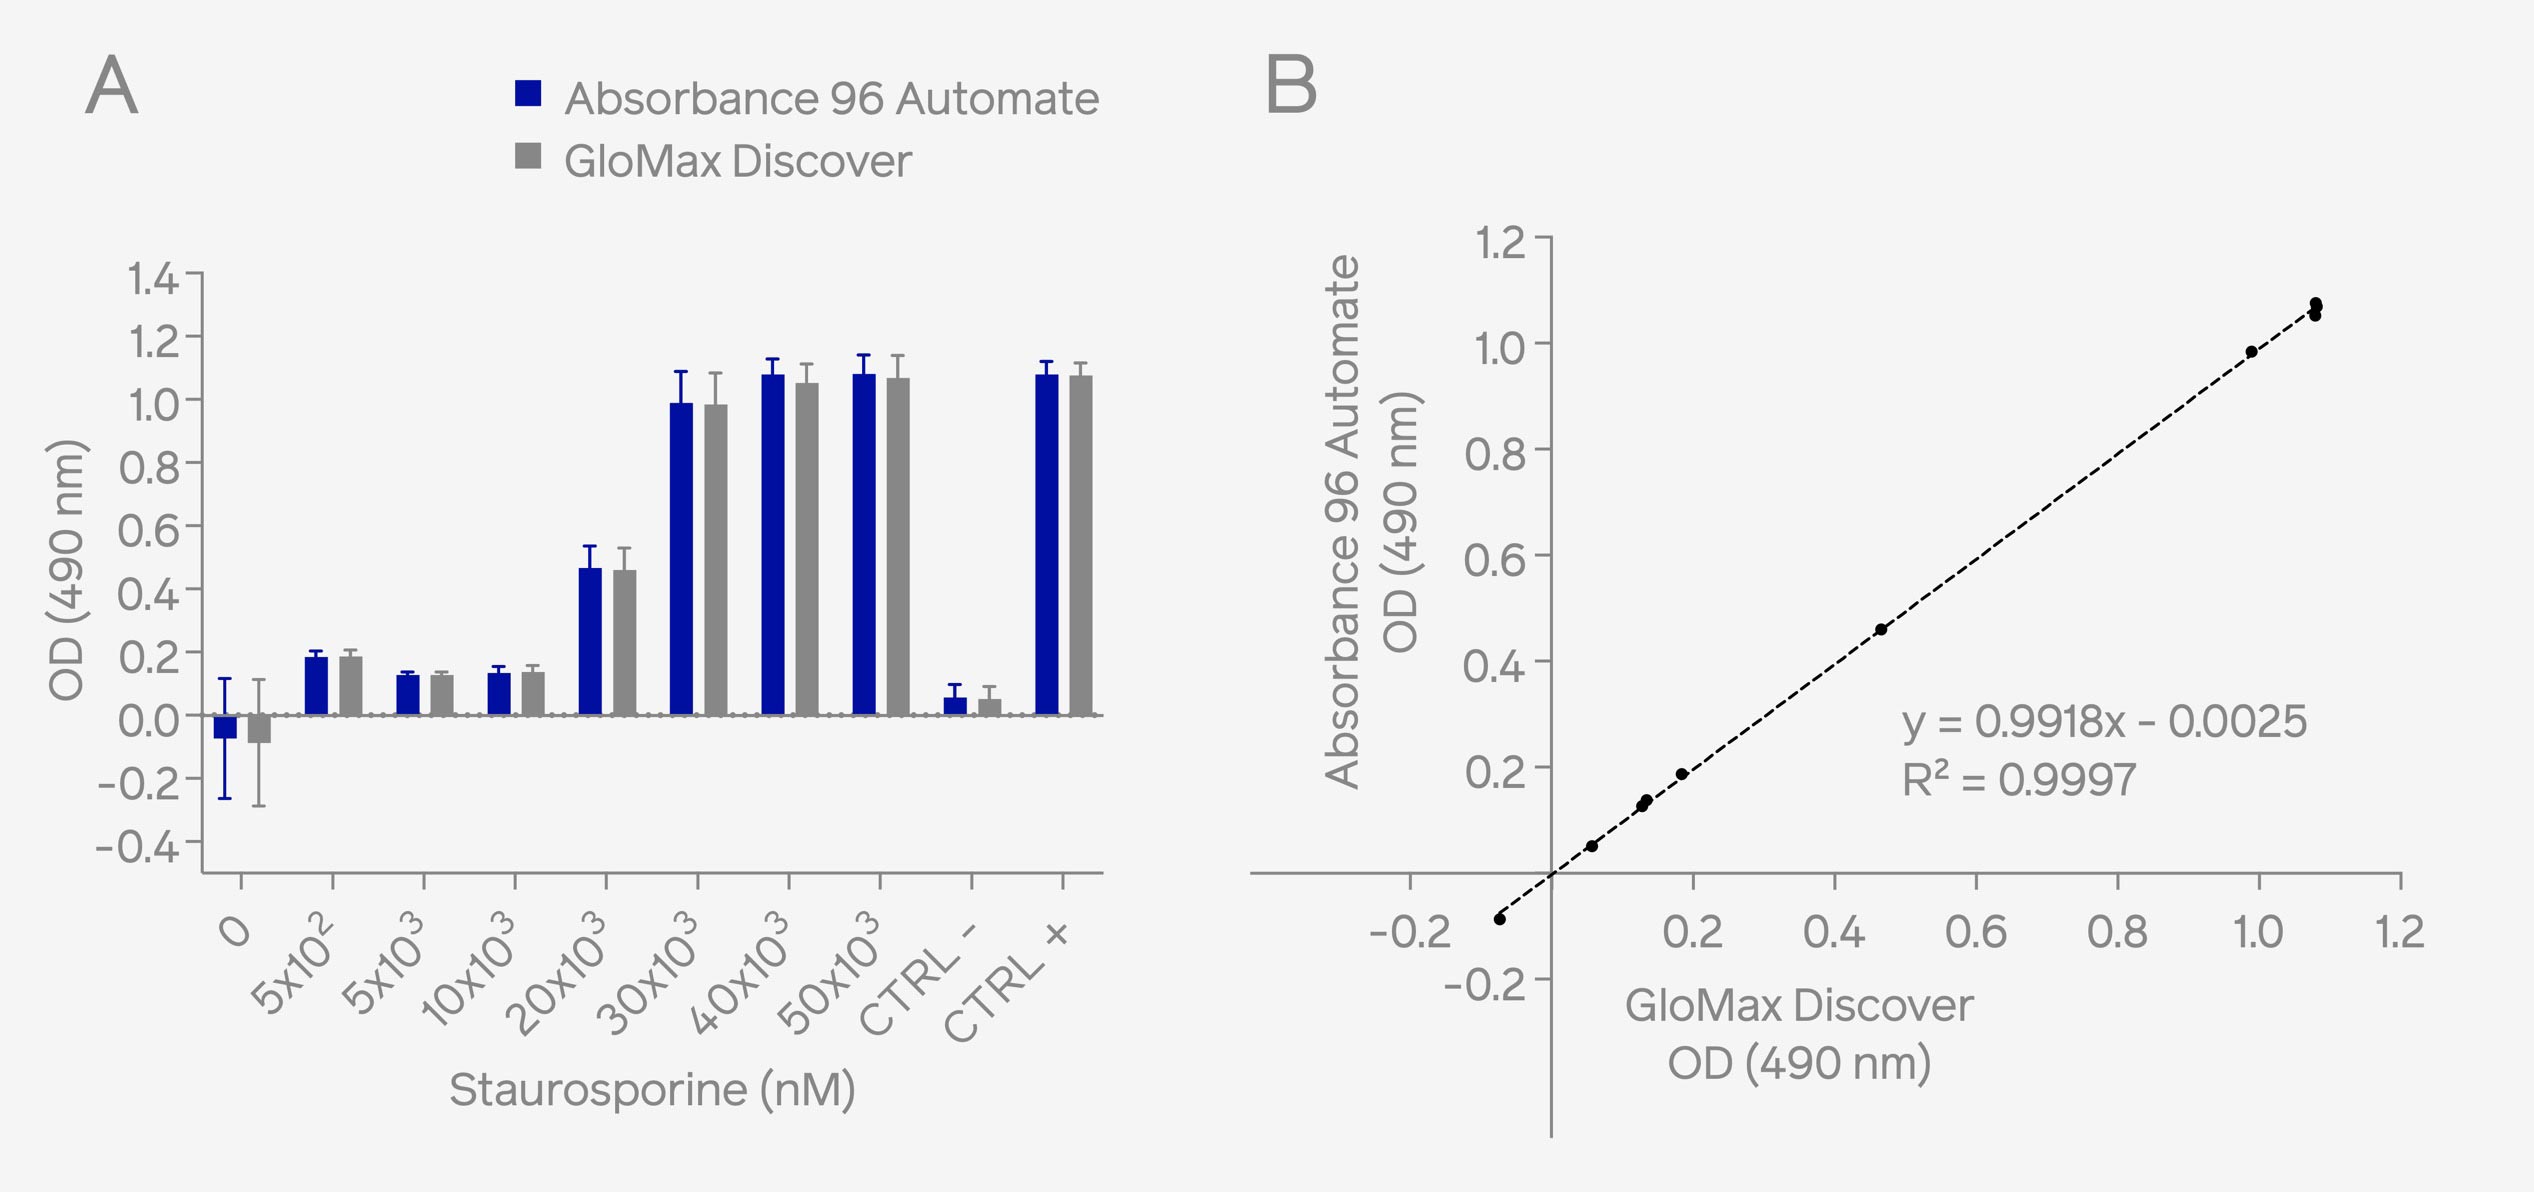 Fig. 1: HeLa cells were treated with Staurosporine to induce cellular cytotoxicity. Assessment of cellular cytotoxicity was conducted using the CytoTox 96® Non-radioactive Cytotoxicity Assay kit. Absorbance measurements at 490 nm were performed using both the on-deck integrated Absorbance 96 Automate on the epMotion® liquid handling system and the benchtop microplate reader, GloMax® Discover. Results demonstrate comparable OD readouts (A) and high correlation (B) across different OD ranges. Performance Validation of Absorbance 96 Automate Integrated on the Eppendorf® epMotion® Deck for Automated Cell-Based Assay Employing CytoTox 96® Kit Byonoy